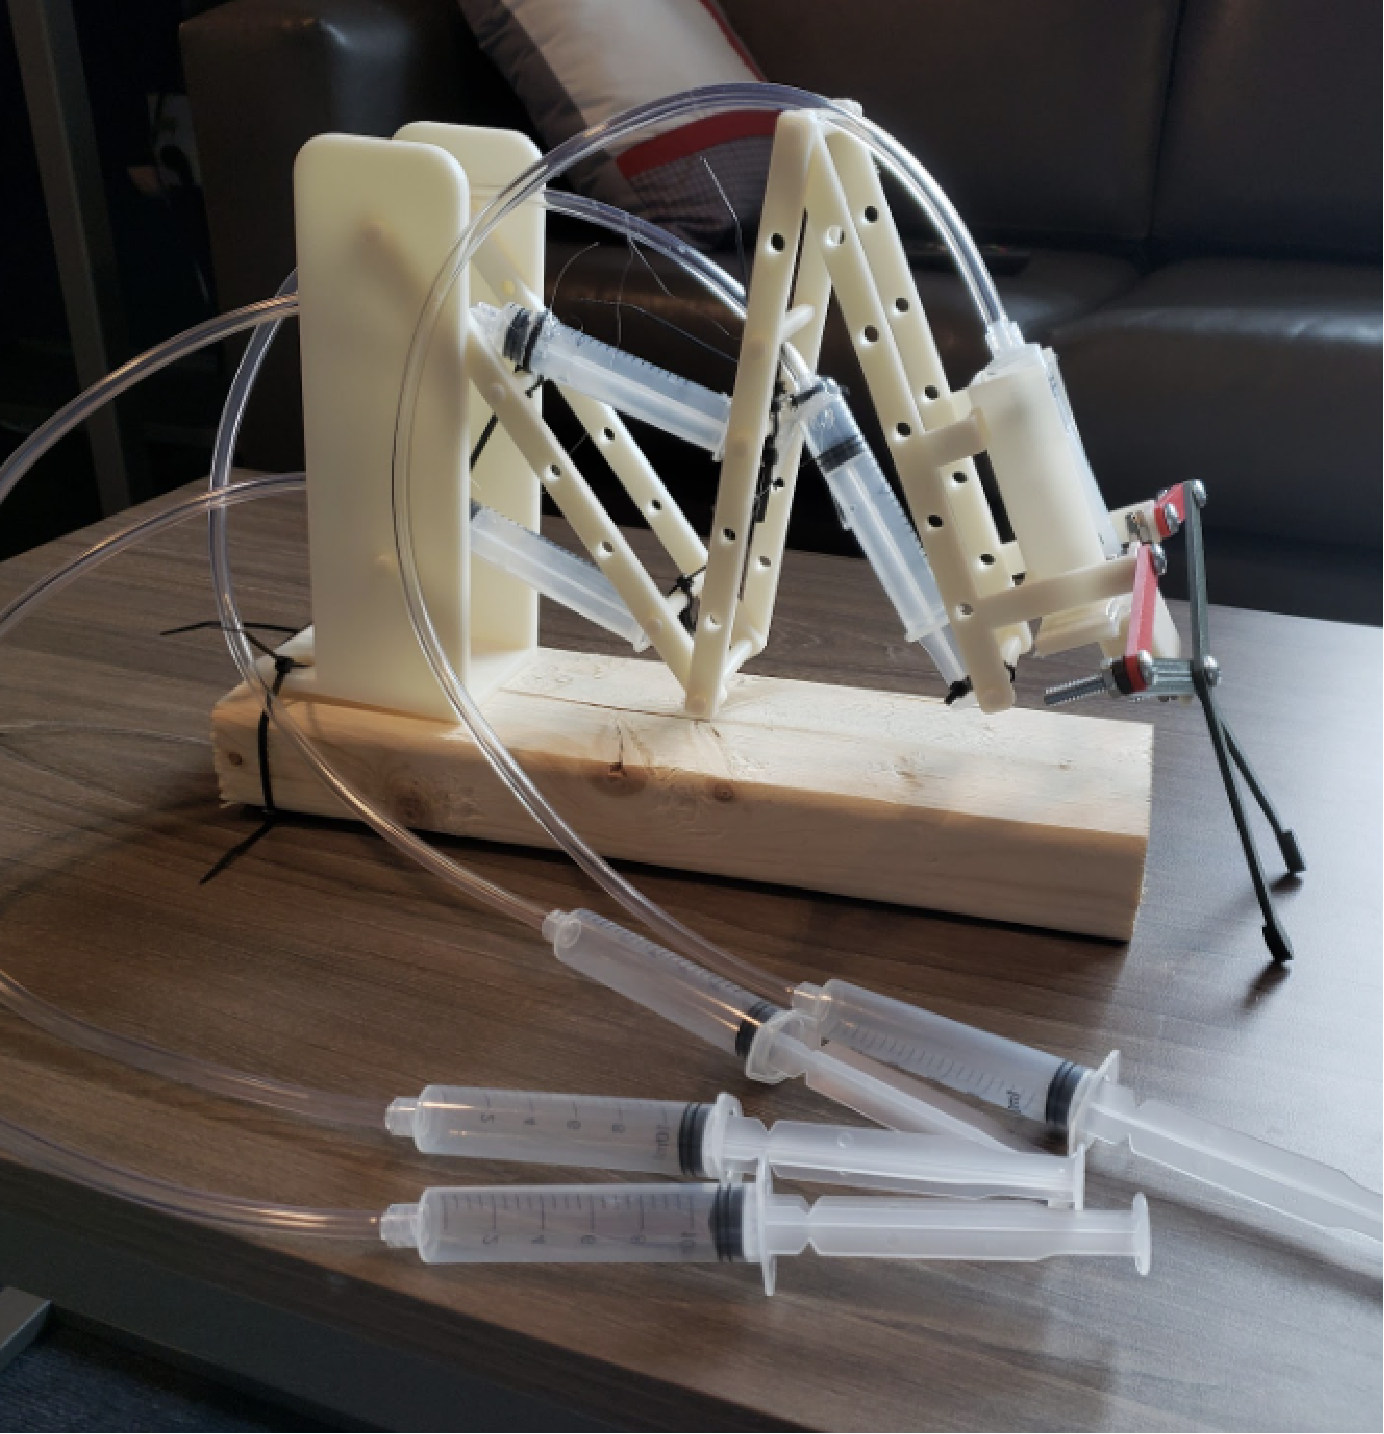 pneumatic arm prototype using syringes, tubes, connector arms, joint arms, and a robotic frame